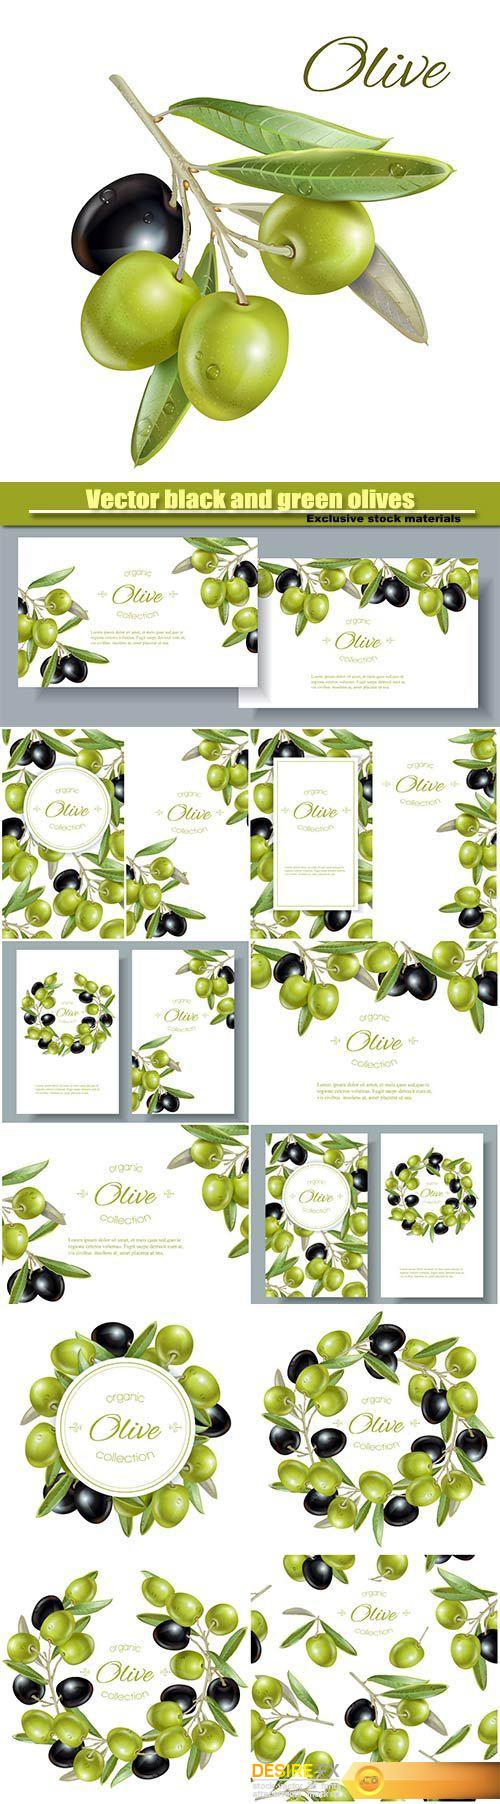 Vector black and green olives on white background